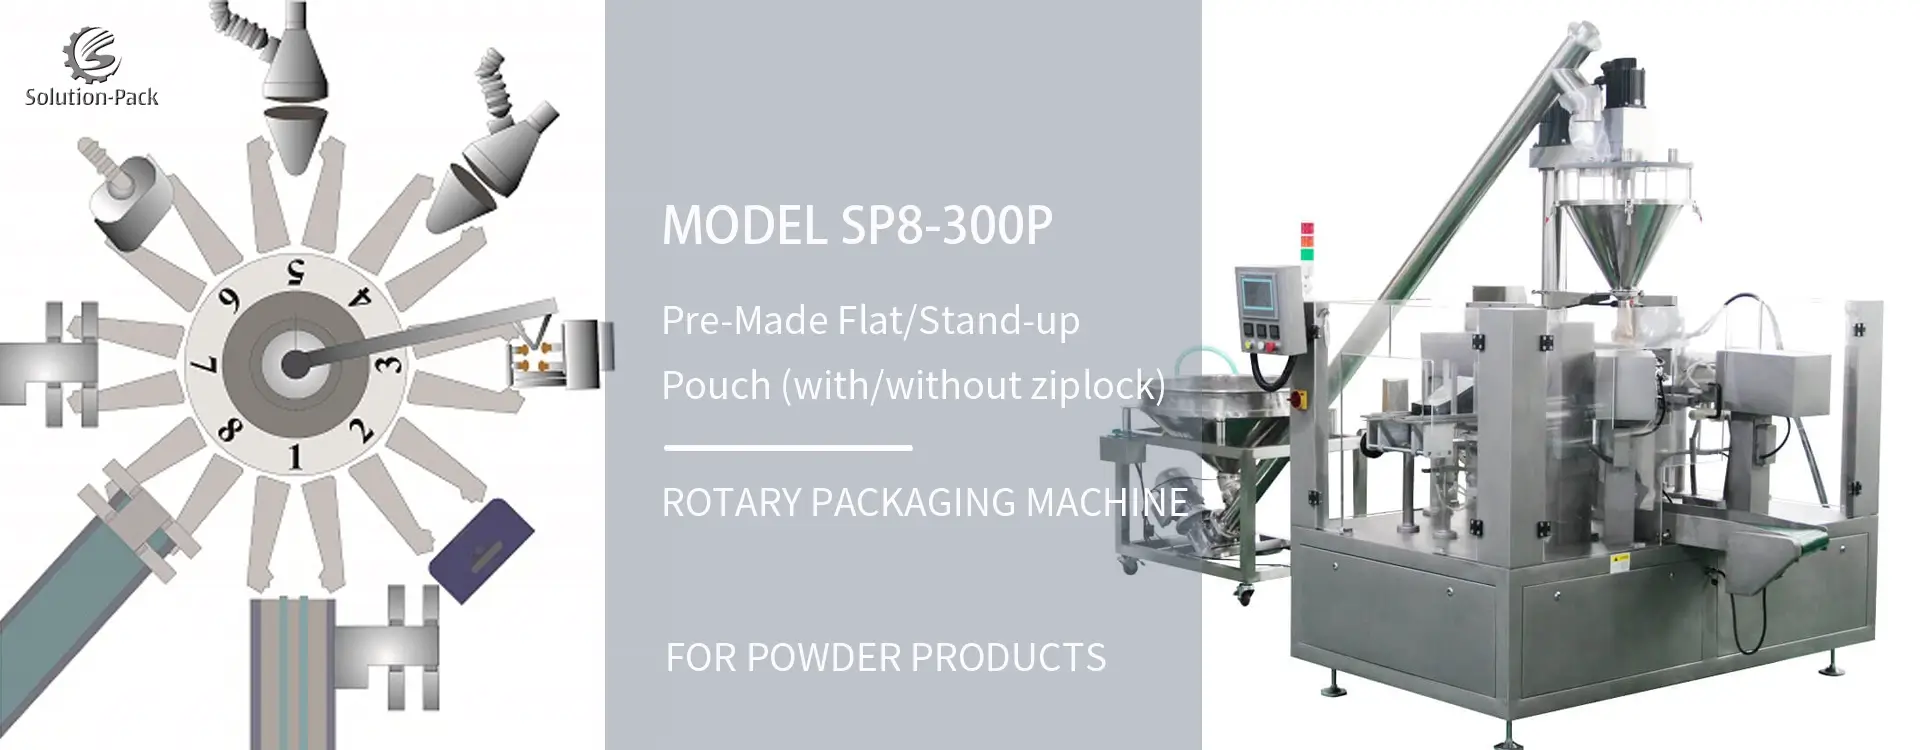 Model SP8-300P Automatic Powder Rotary Packaging Machine Solution Heading Banner Picture | Solution-Pack